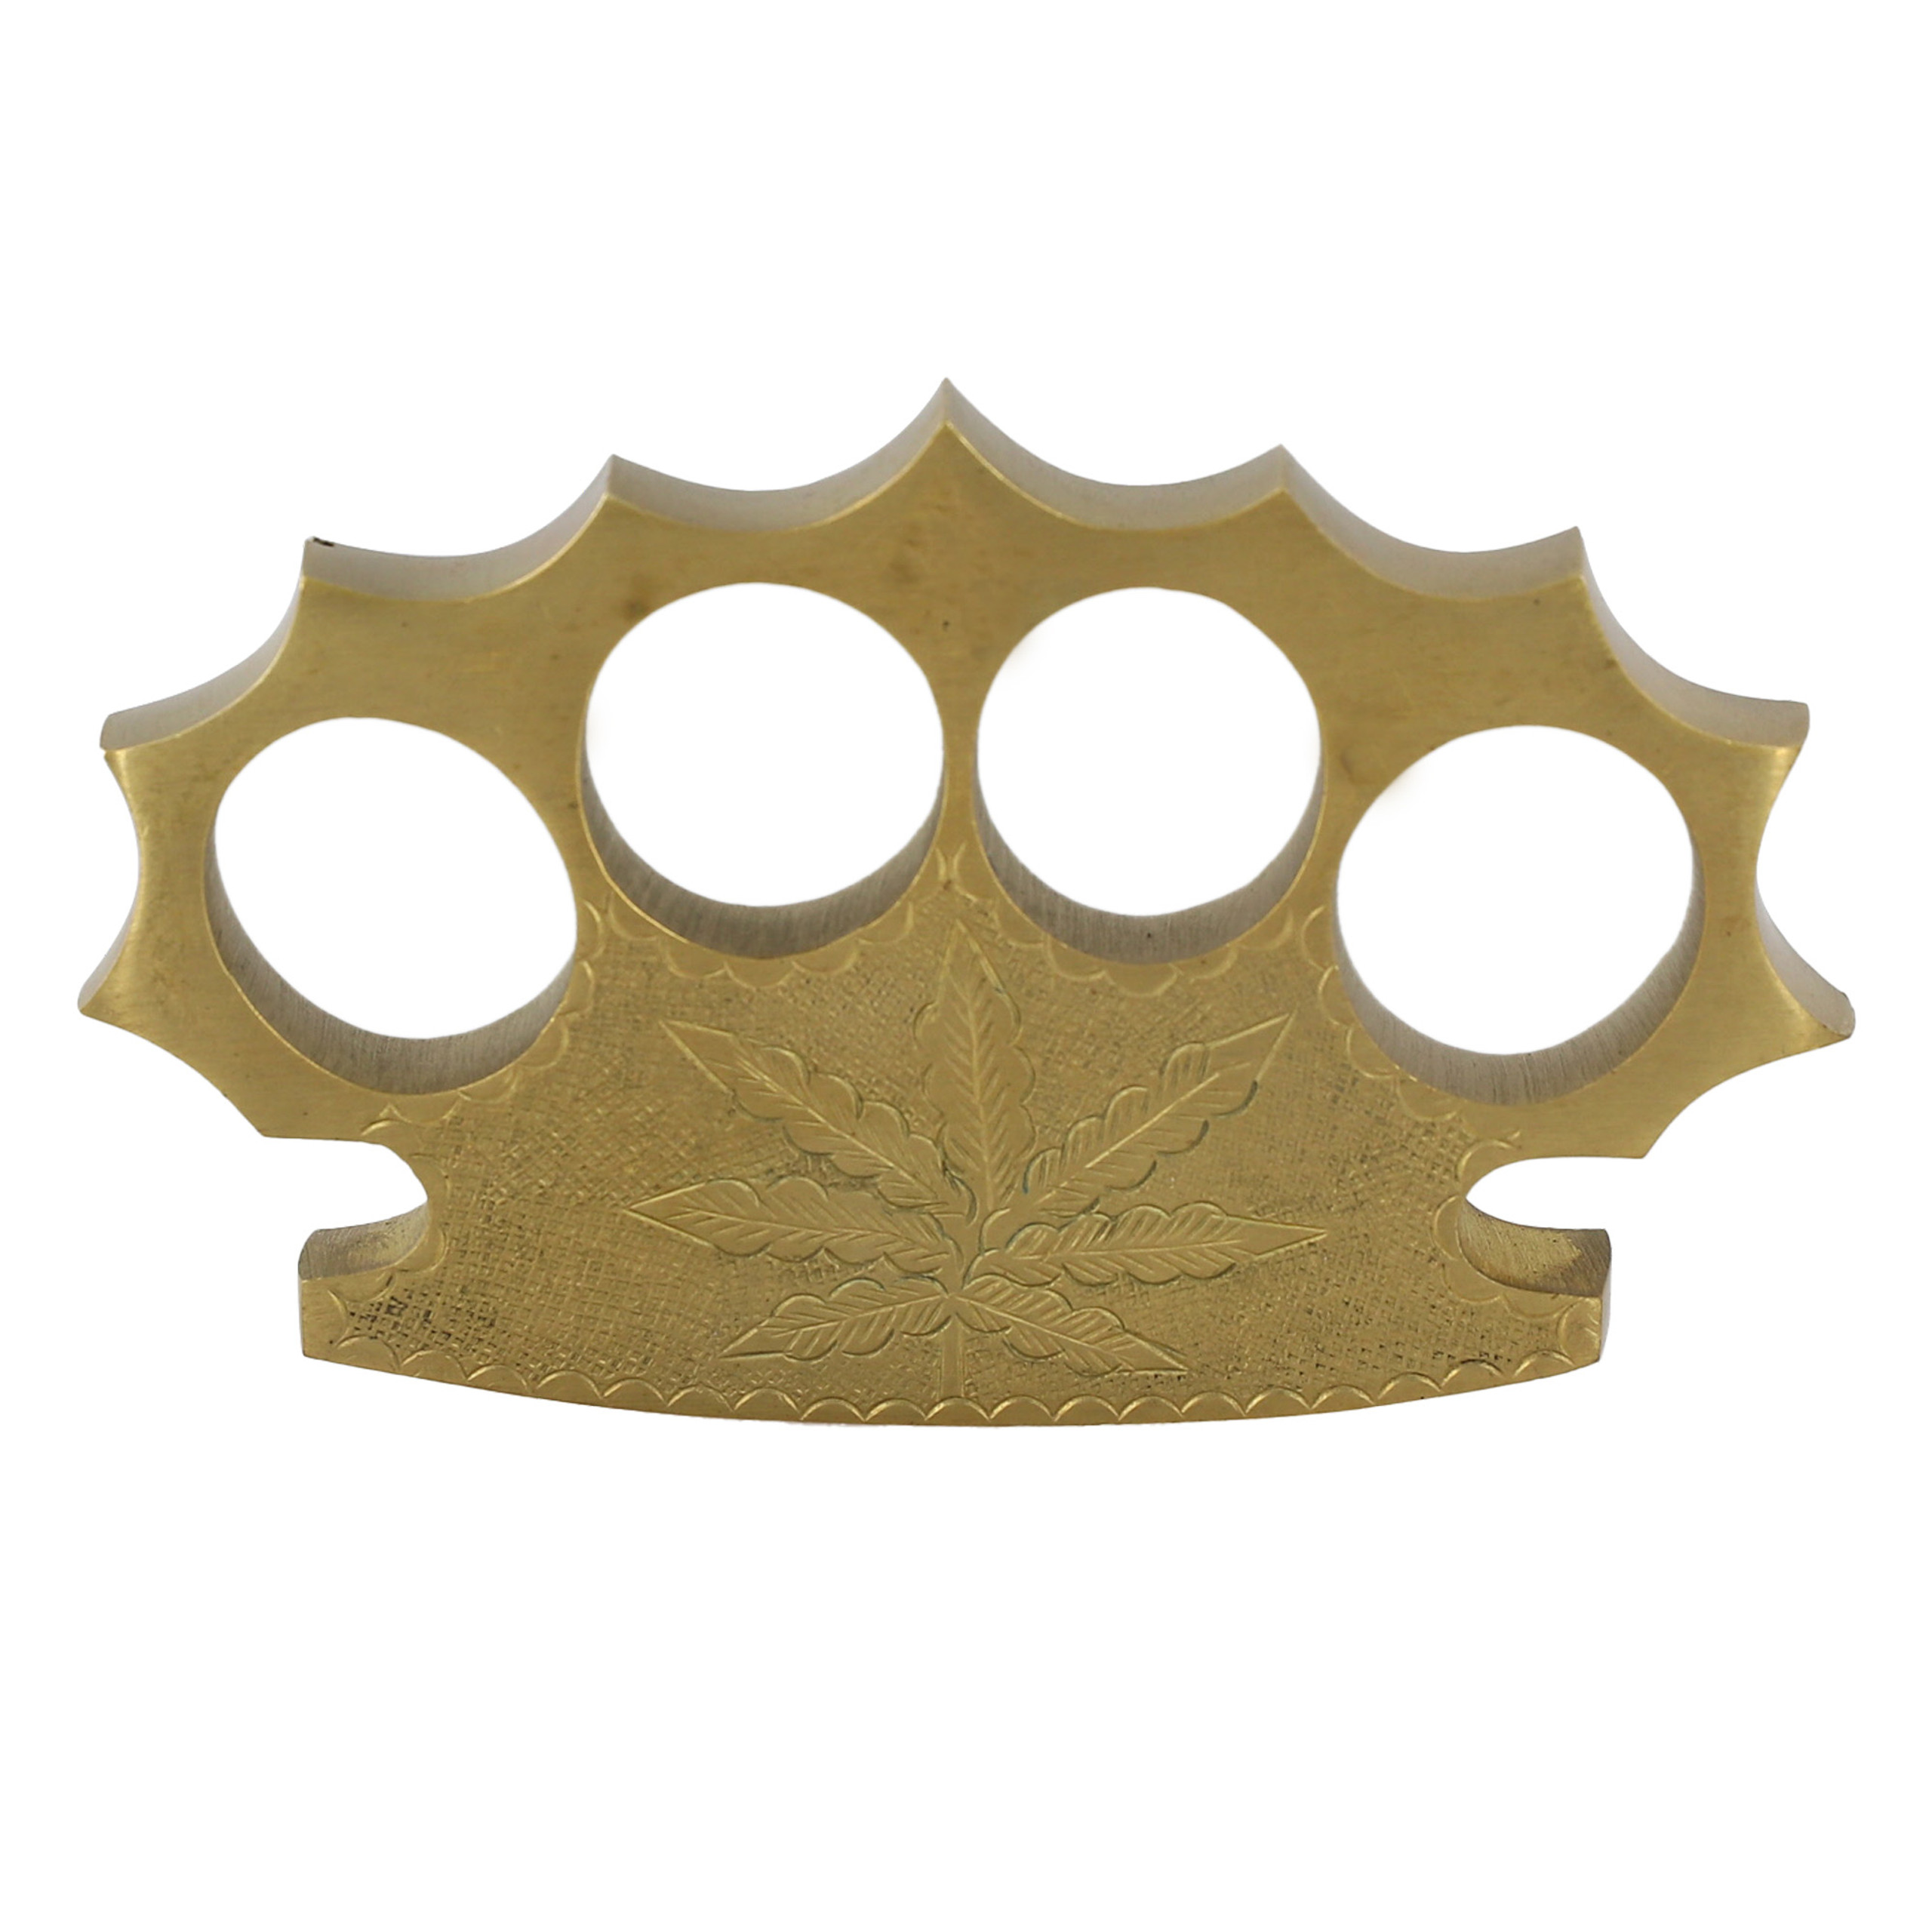 Brass Knuckles For Sale | Buy High Quality Brass Knuckles